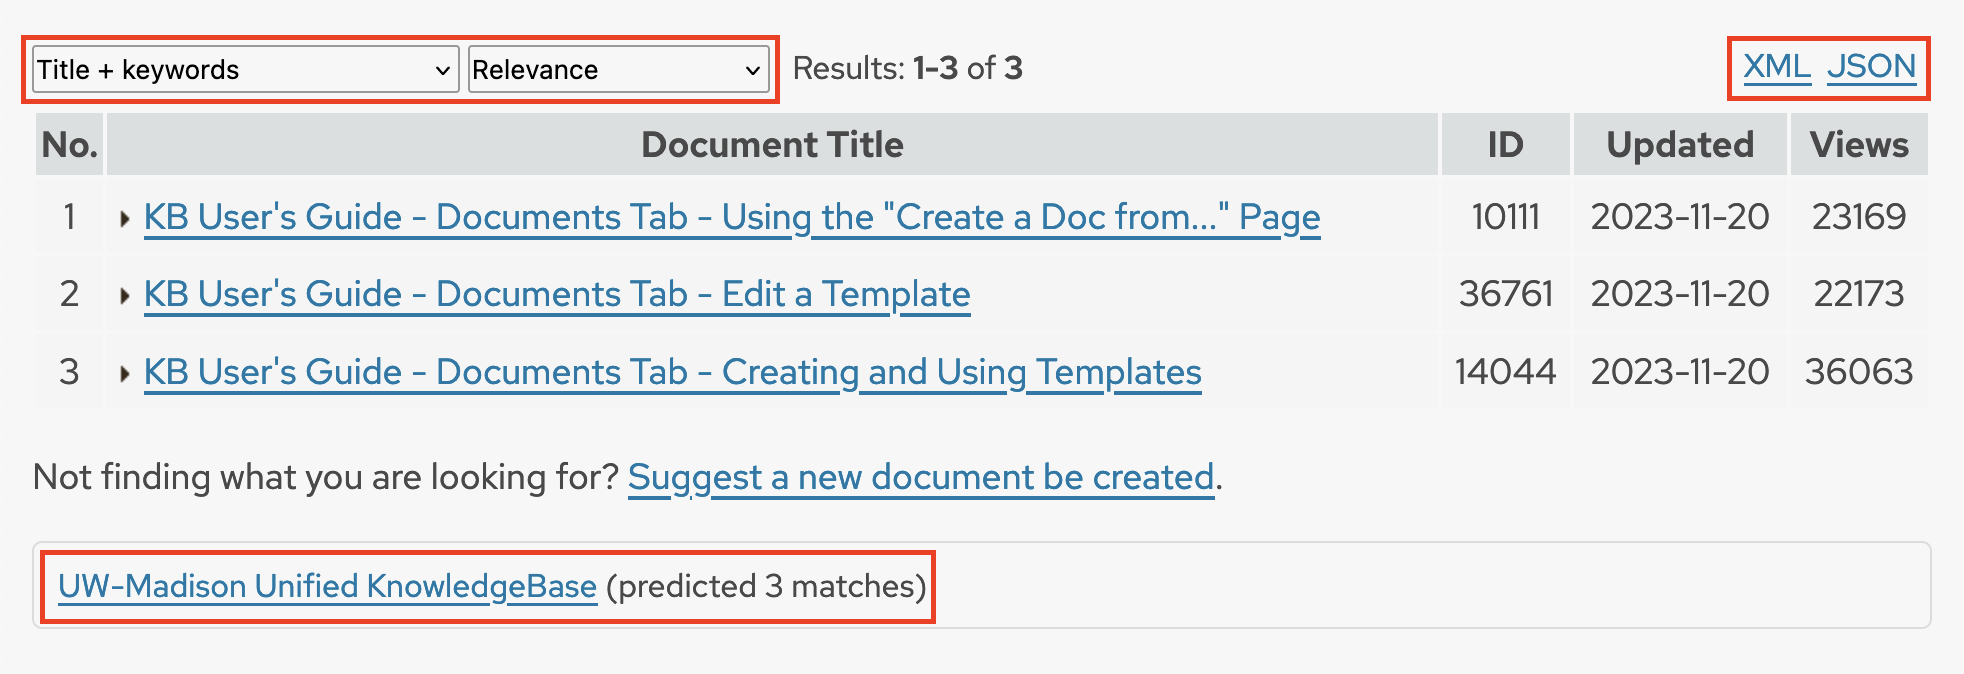 Above the search results table, the search mode and sorting dropdowns are highlighted, followed by links for XML and JSON. Below the table, a link that reads "UW-Madison Unified KnowledgeBase" is highlighted.